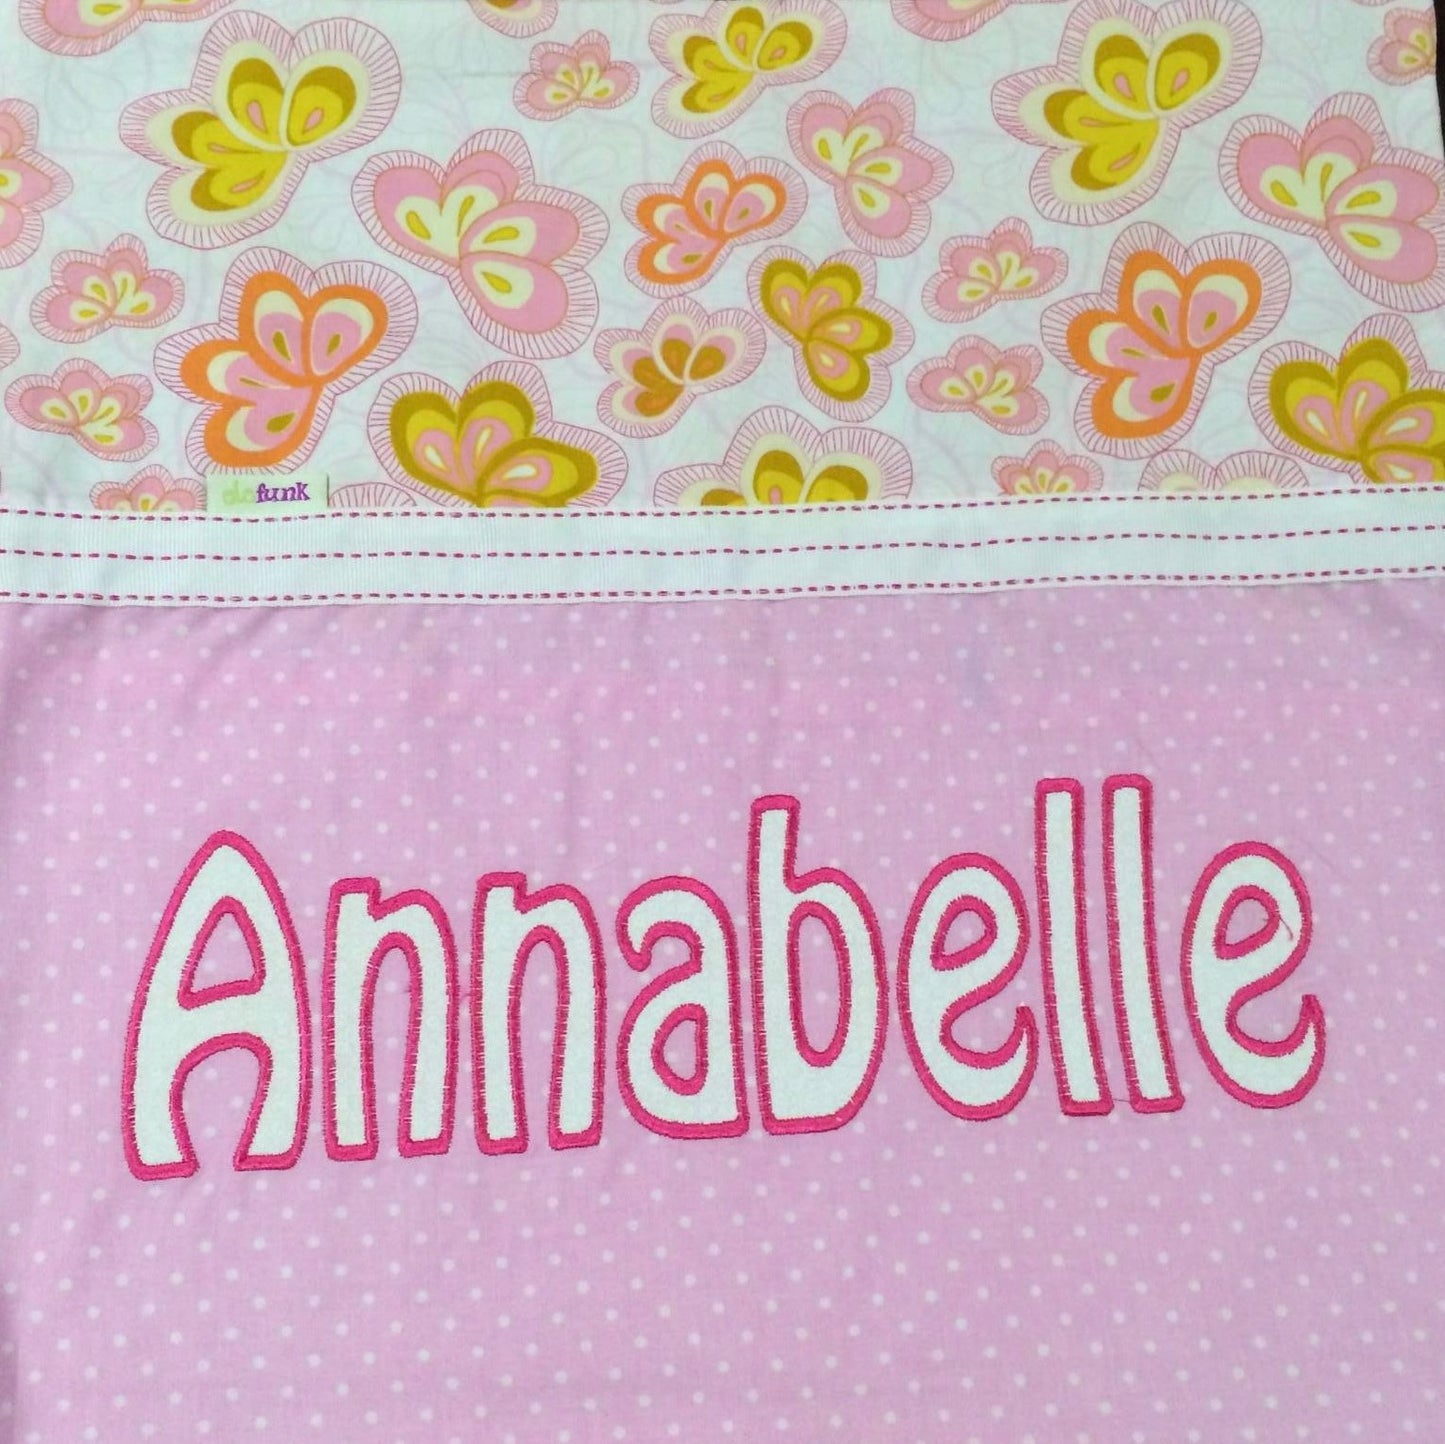 Annabelle Handmade Personalised Cushion Cover